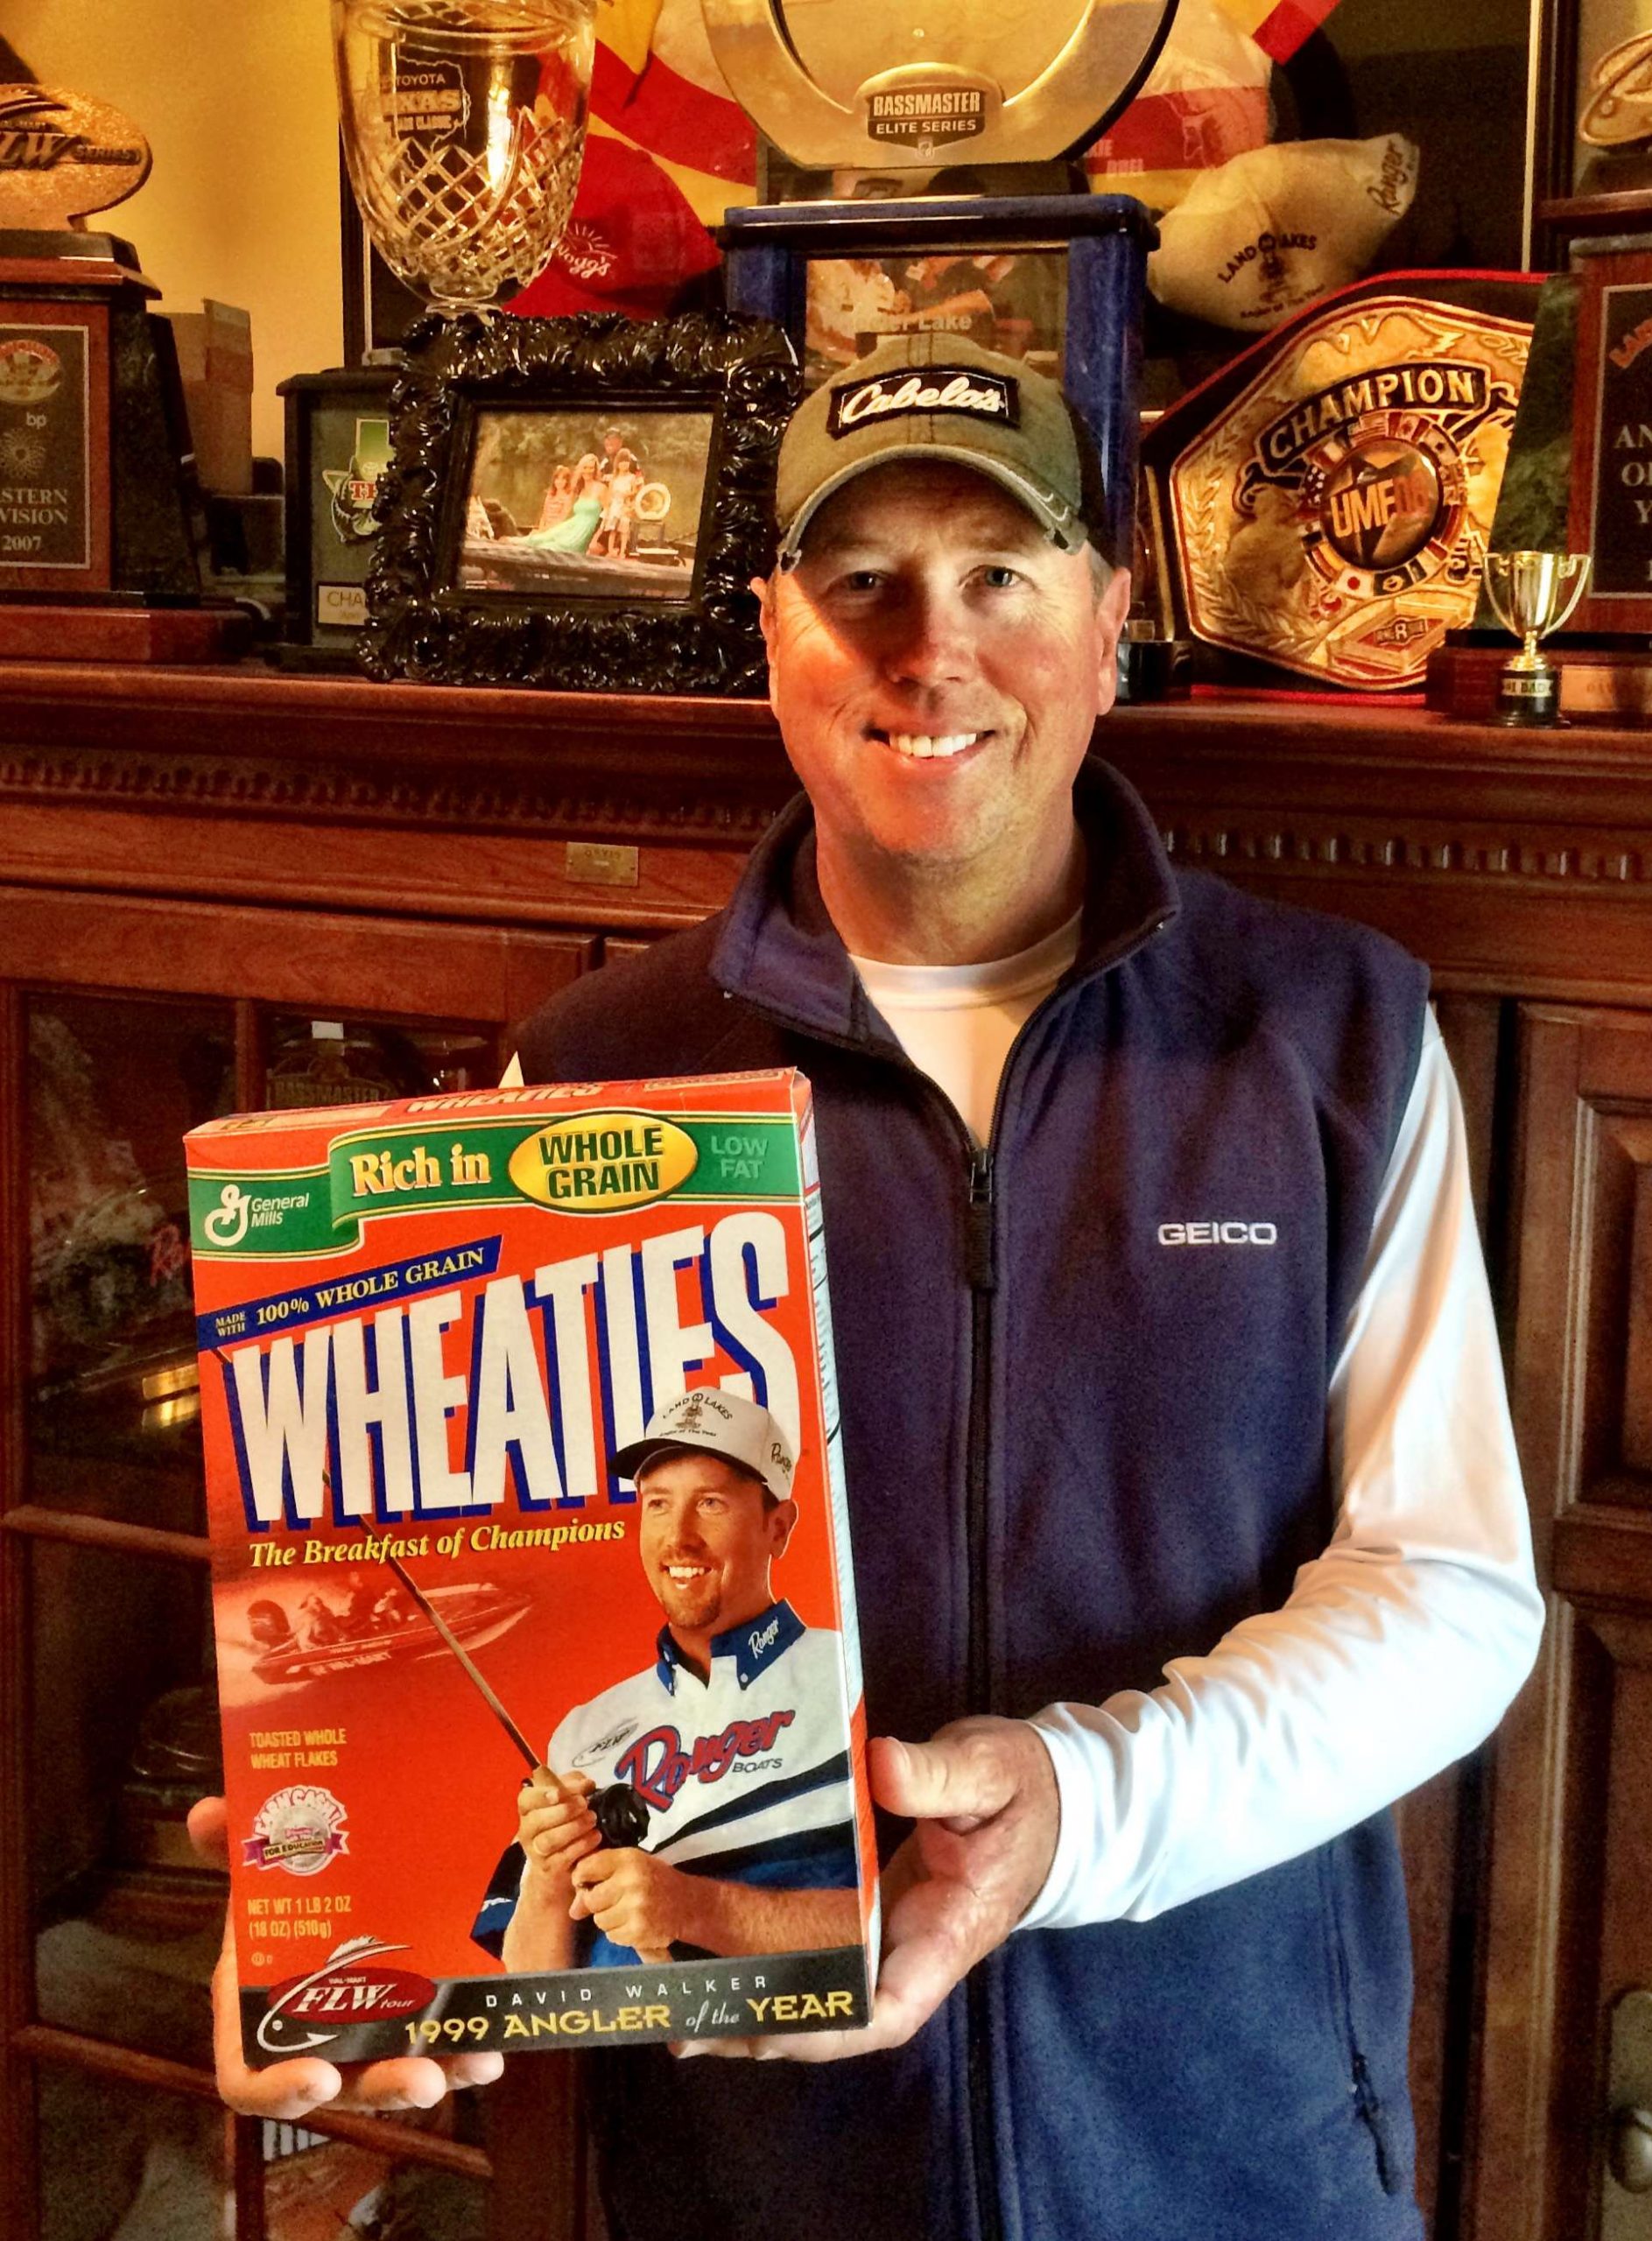 13. What is the greatest accomplishment in your bass fishing career?

Being on a Wheaties box was pretty cool, but Iâd have to go with my Elite Series win on Lake Wheeler in 2011. And the main reason is because I beat KVD cranking on a TVA lake in June. Trust me, thatâs a major accomplishment! 